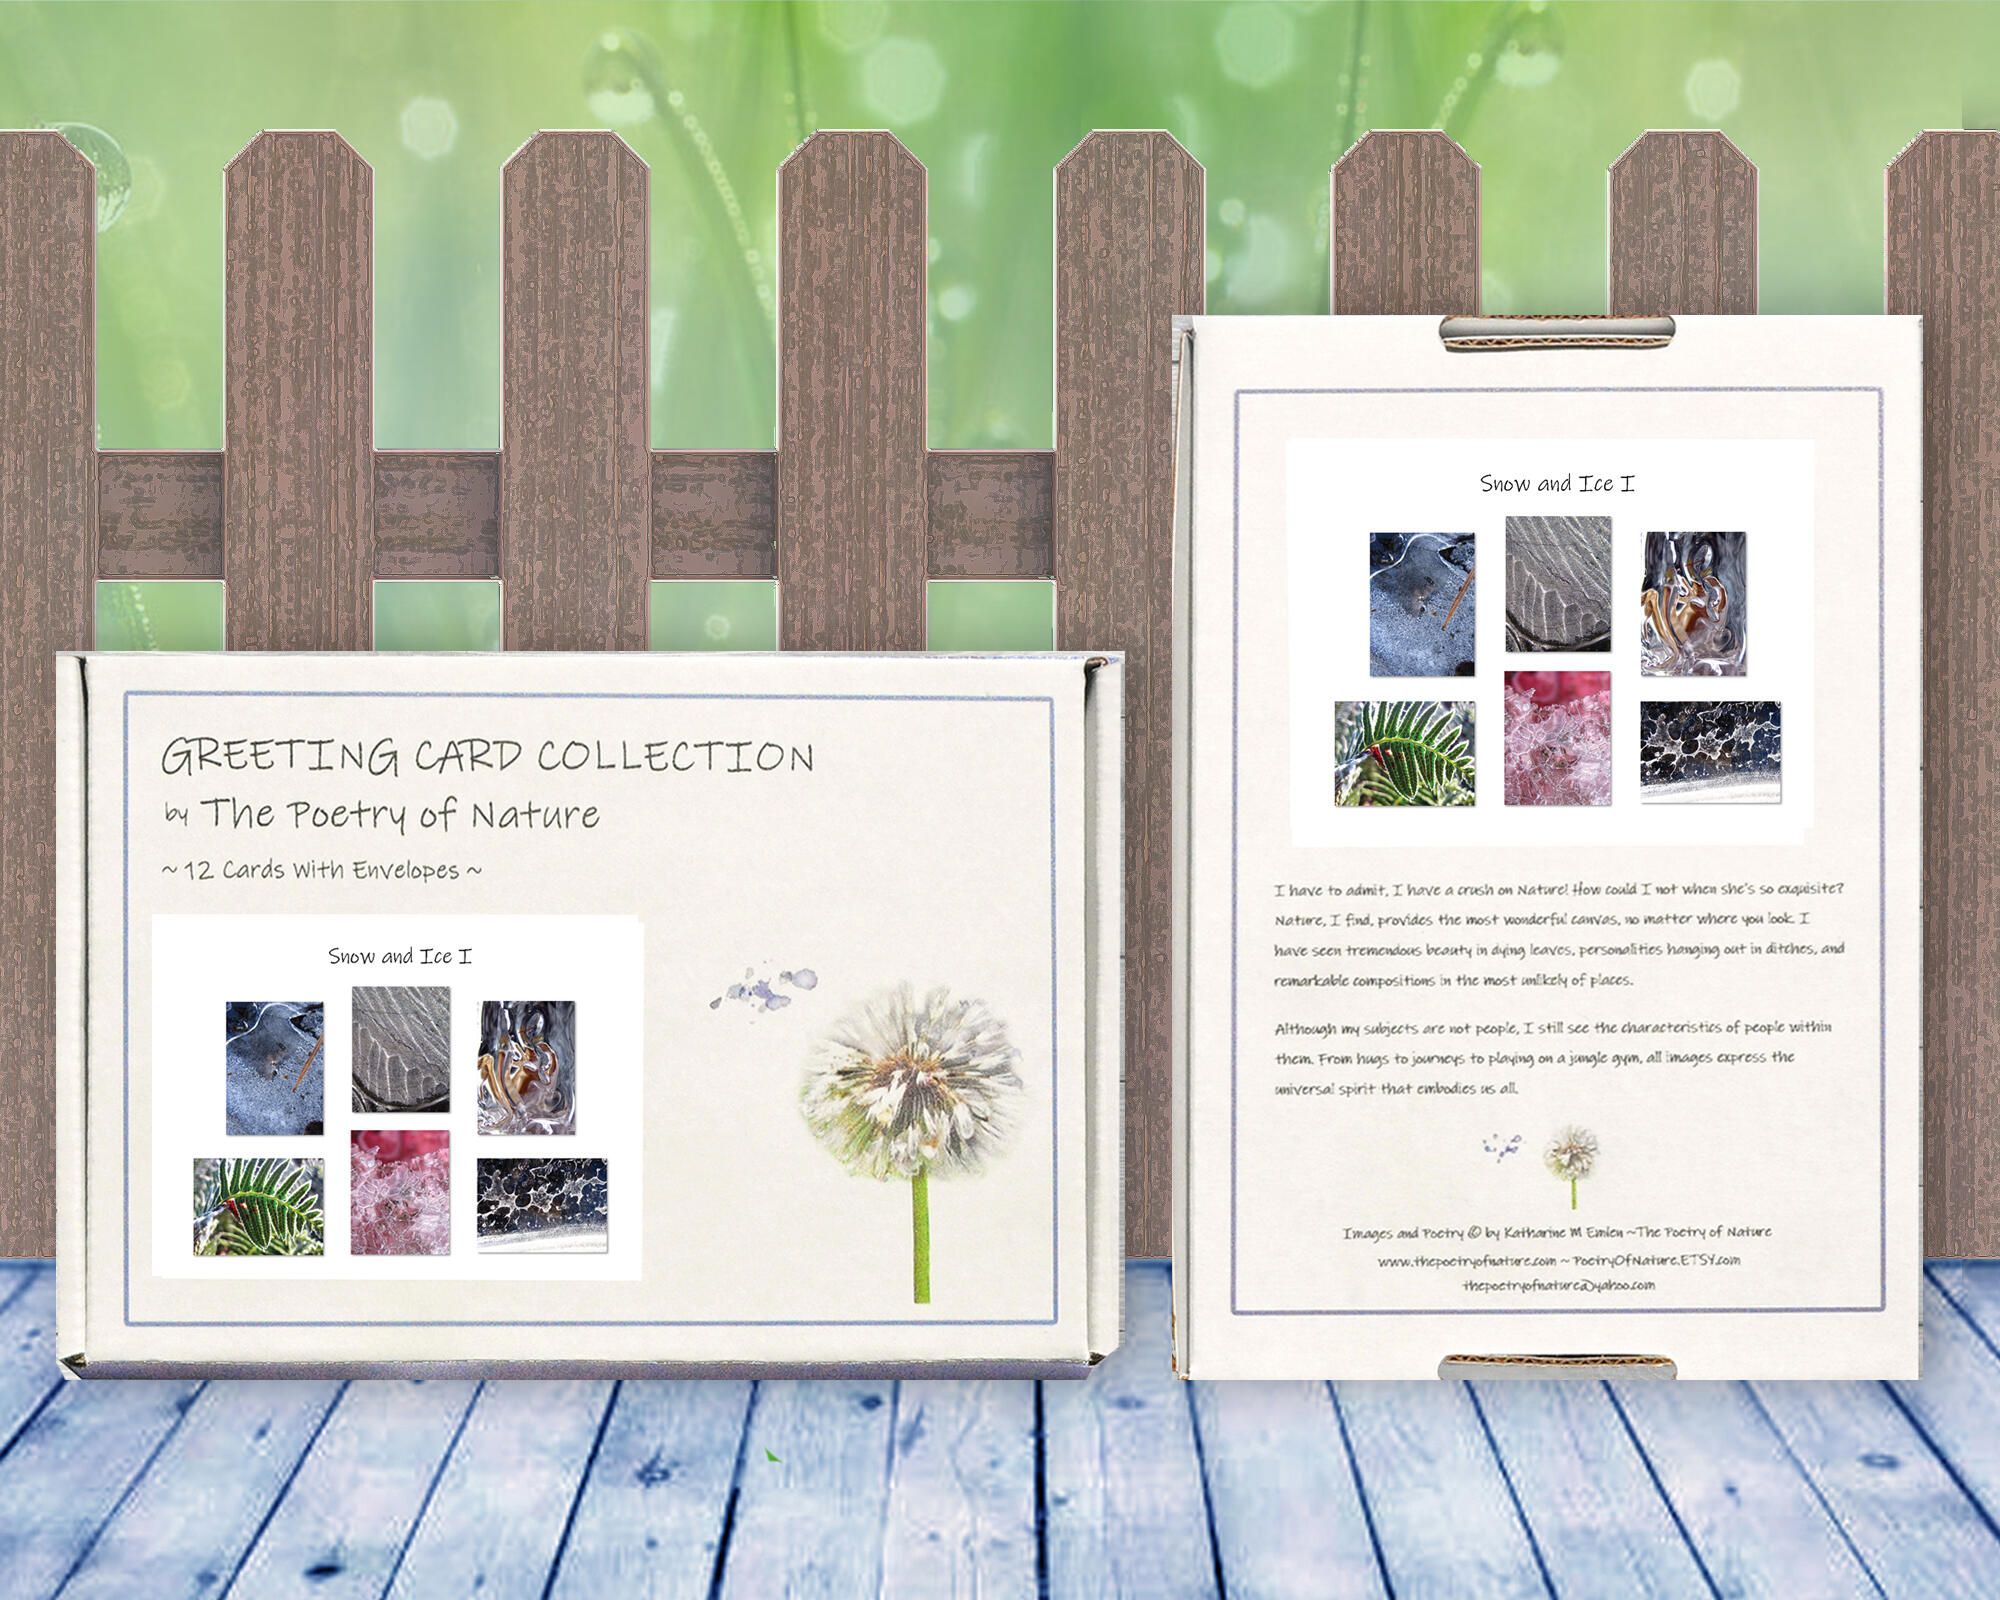 Snow and Ice I - greeting card collection by The Poetry of Nature, Stories in nature photo cards with poems. Boxed Set Baker's Dozen